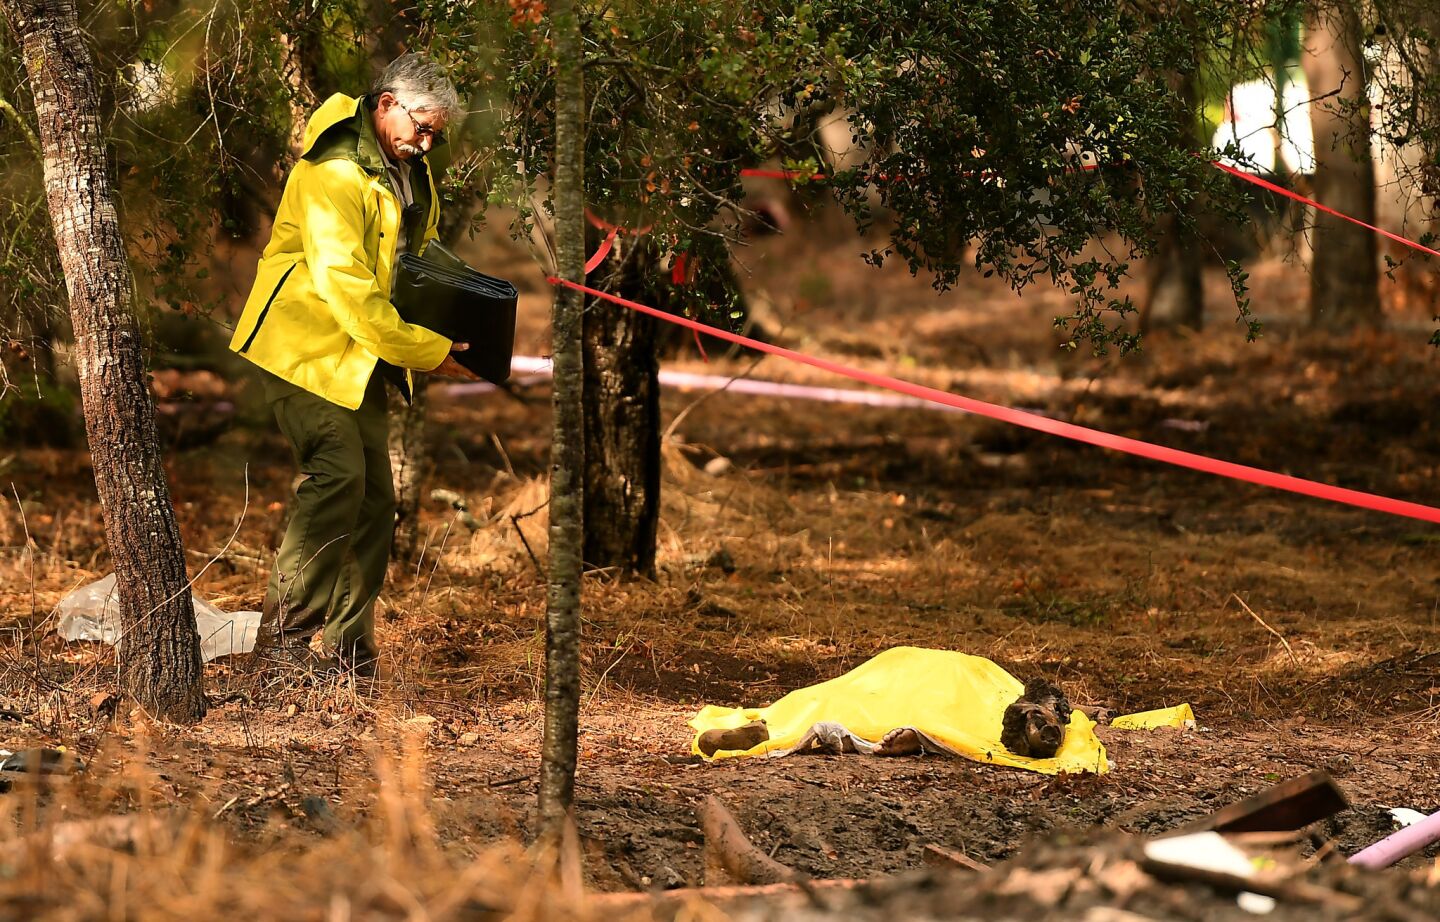 A sheriffs deputy stands near a body covered by a tarp near Hot Springs Road in Montecito after a deadly mudslide swept through the area.